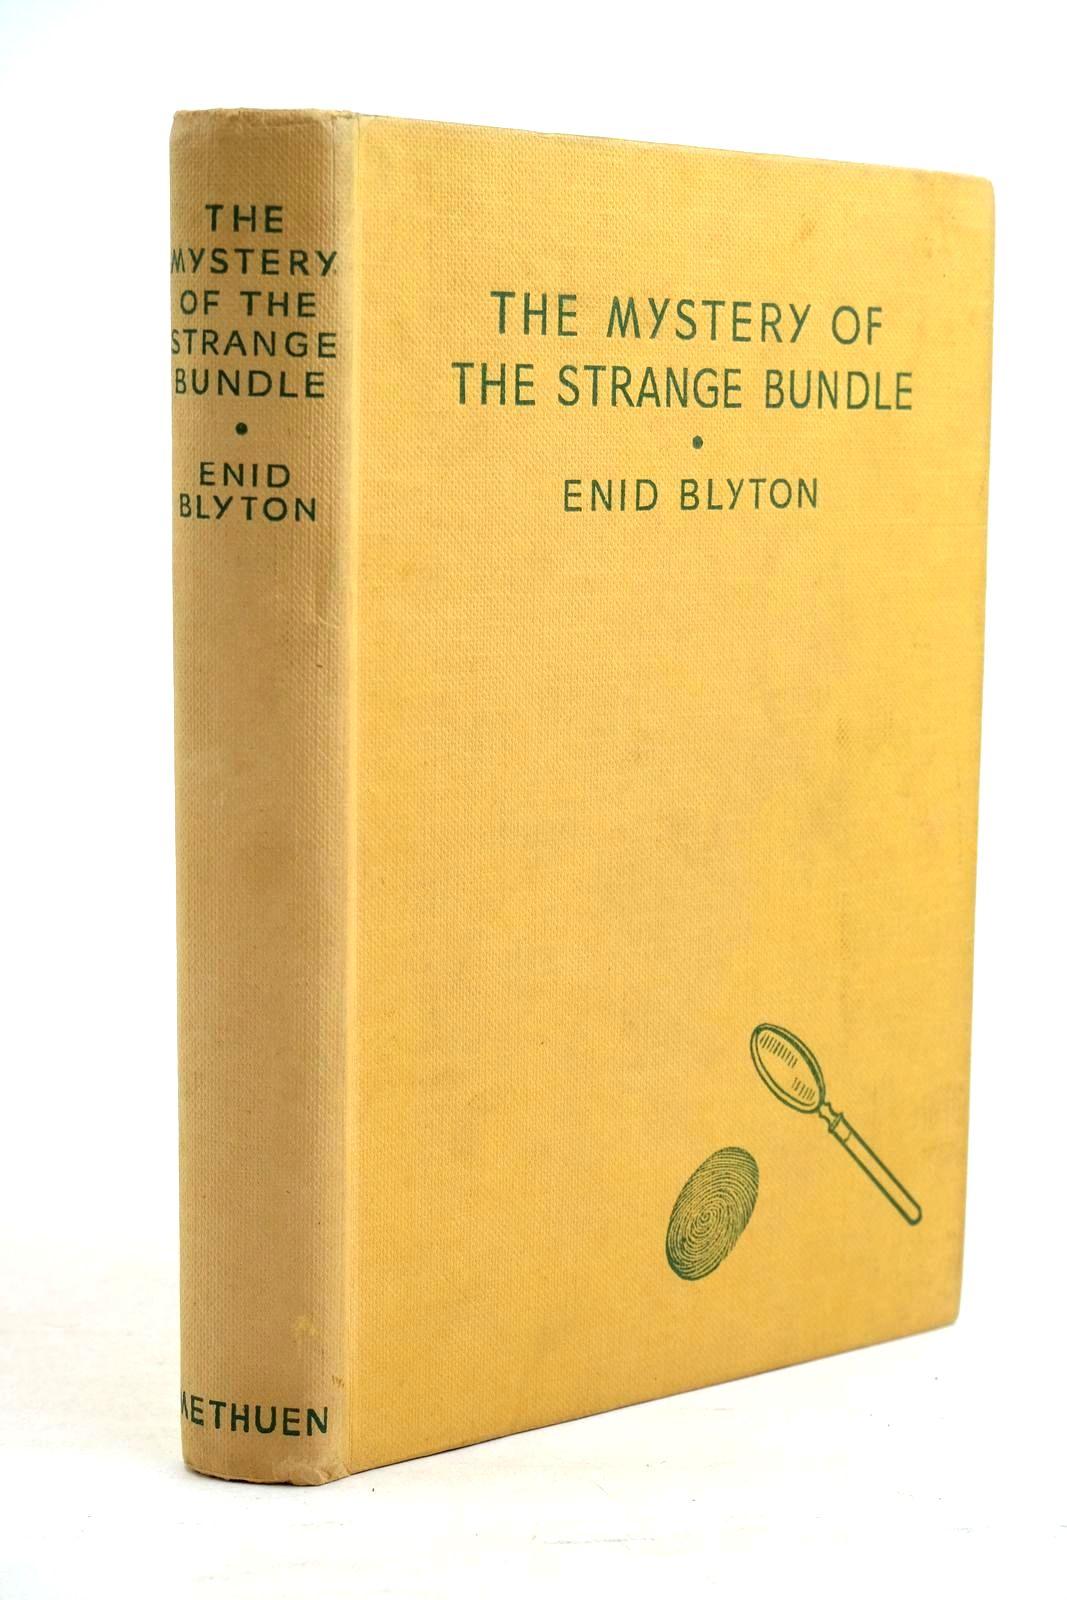 Photo of THE MYSTERY OF THE STRANGE BUNDLE written by Blyton, Enid illustrated by Evans, Treyer published by Methuen & Co. Ltd. (STOCK CODE: 1320725)  for sale by Stella & Rose's Books